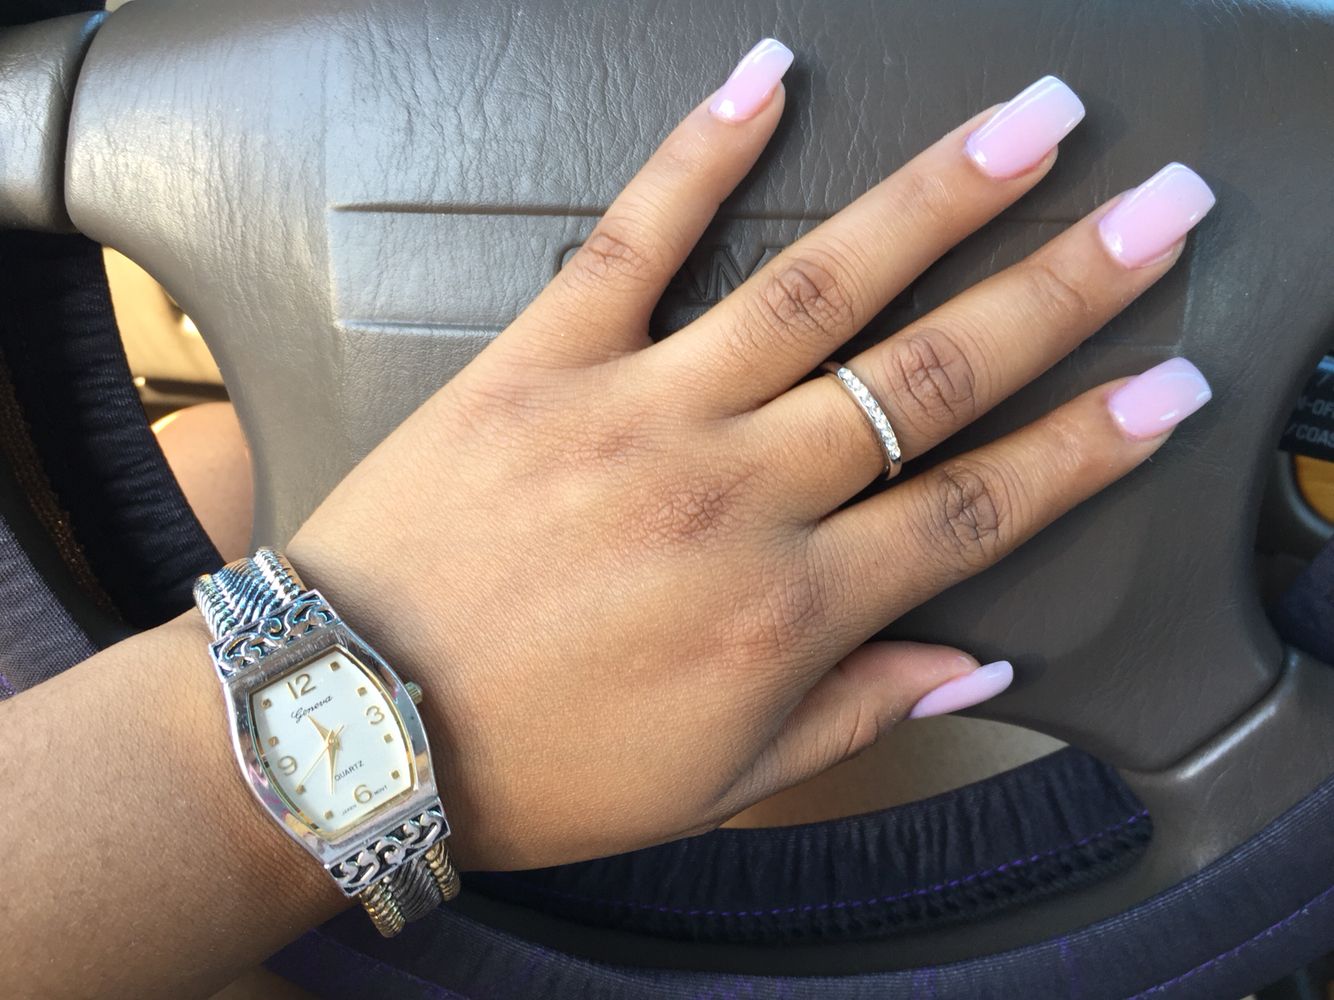 8. "Prom Nail Ideas: Long Square Acrylic Nails with Pastel Colors" - wide 1